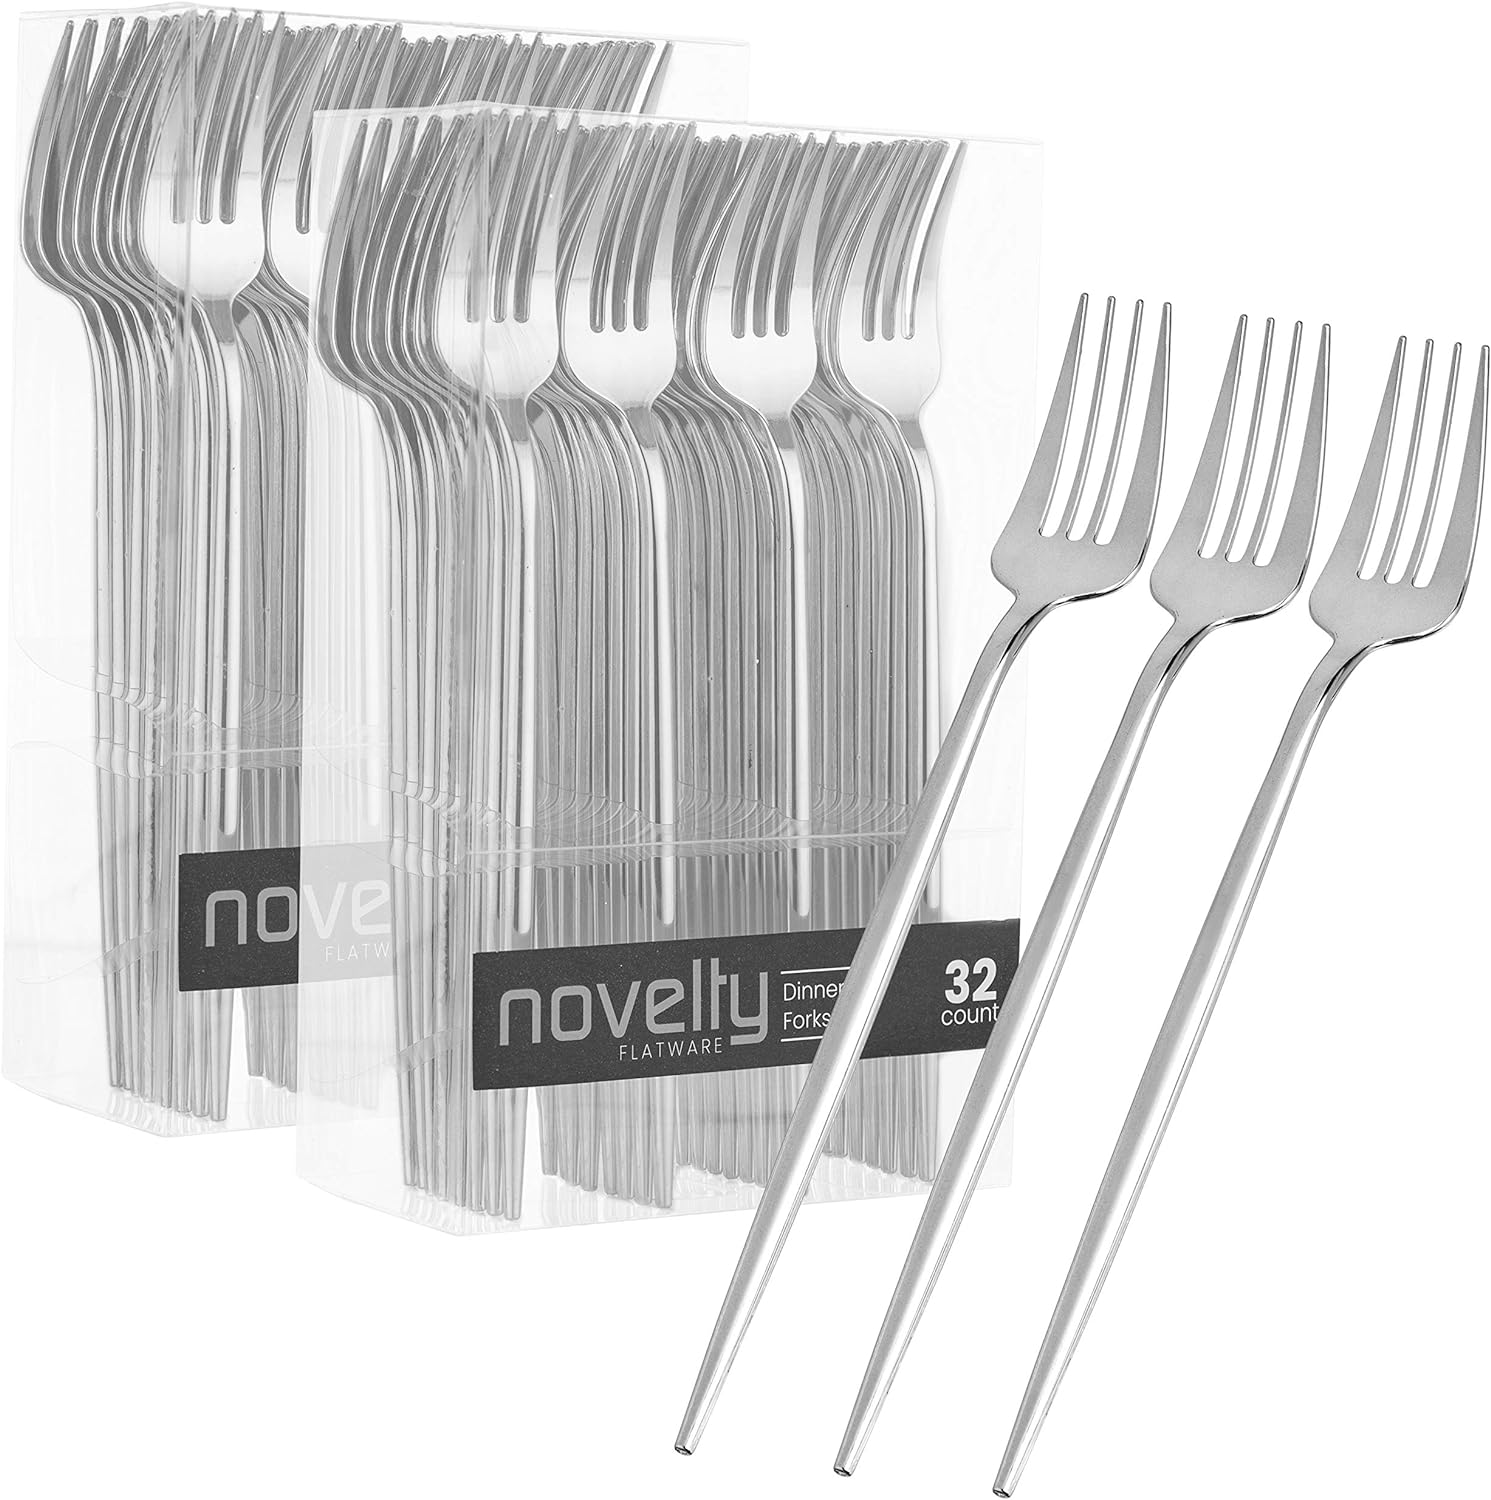 Novelty Modern Flatware, Cutlery, Disposable Plastic Dinner forks Luxury Silver 64 Count